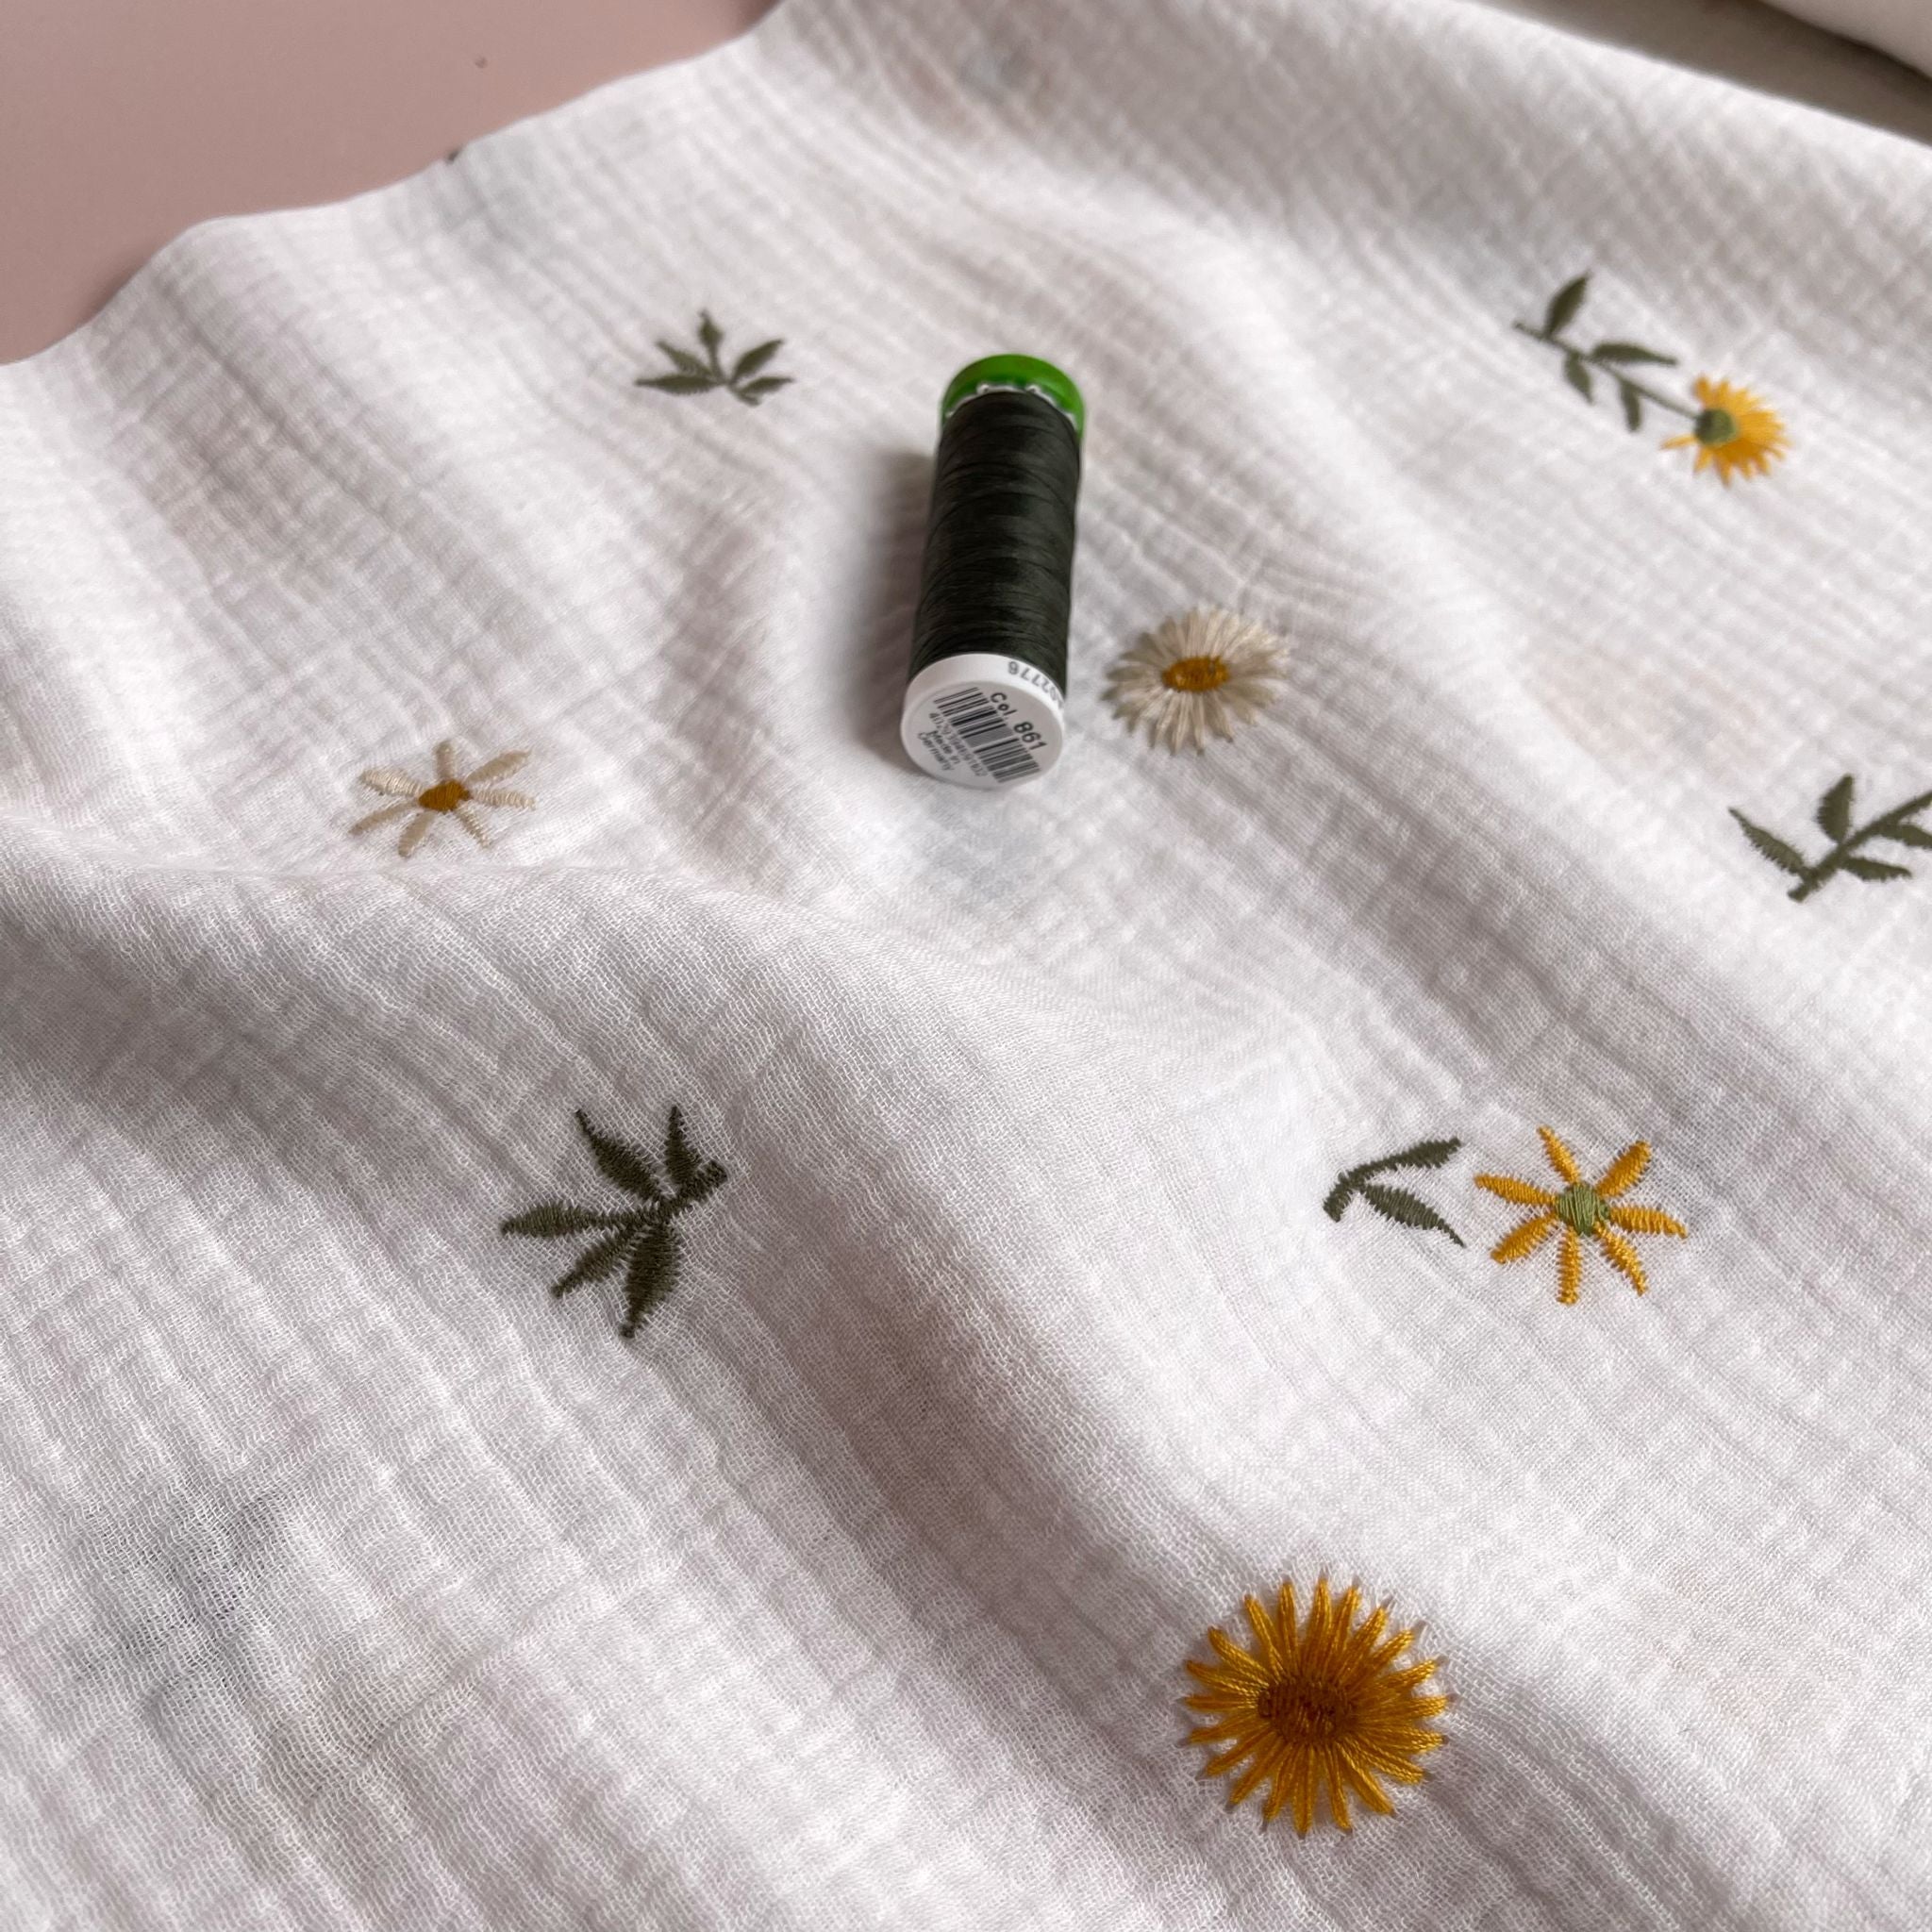 Embroidered Sunflowers on White Cotton Double Gauze